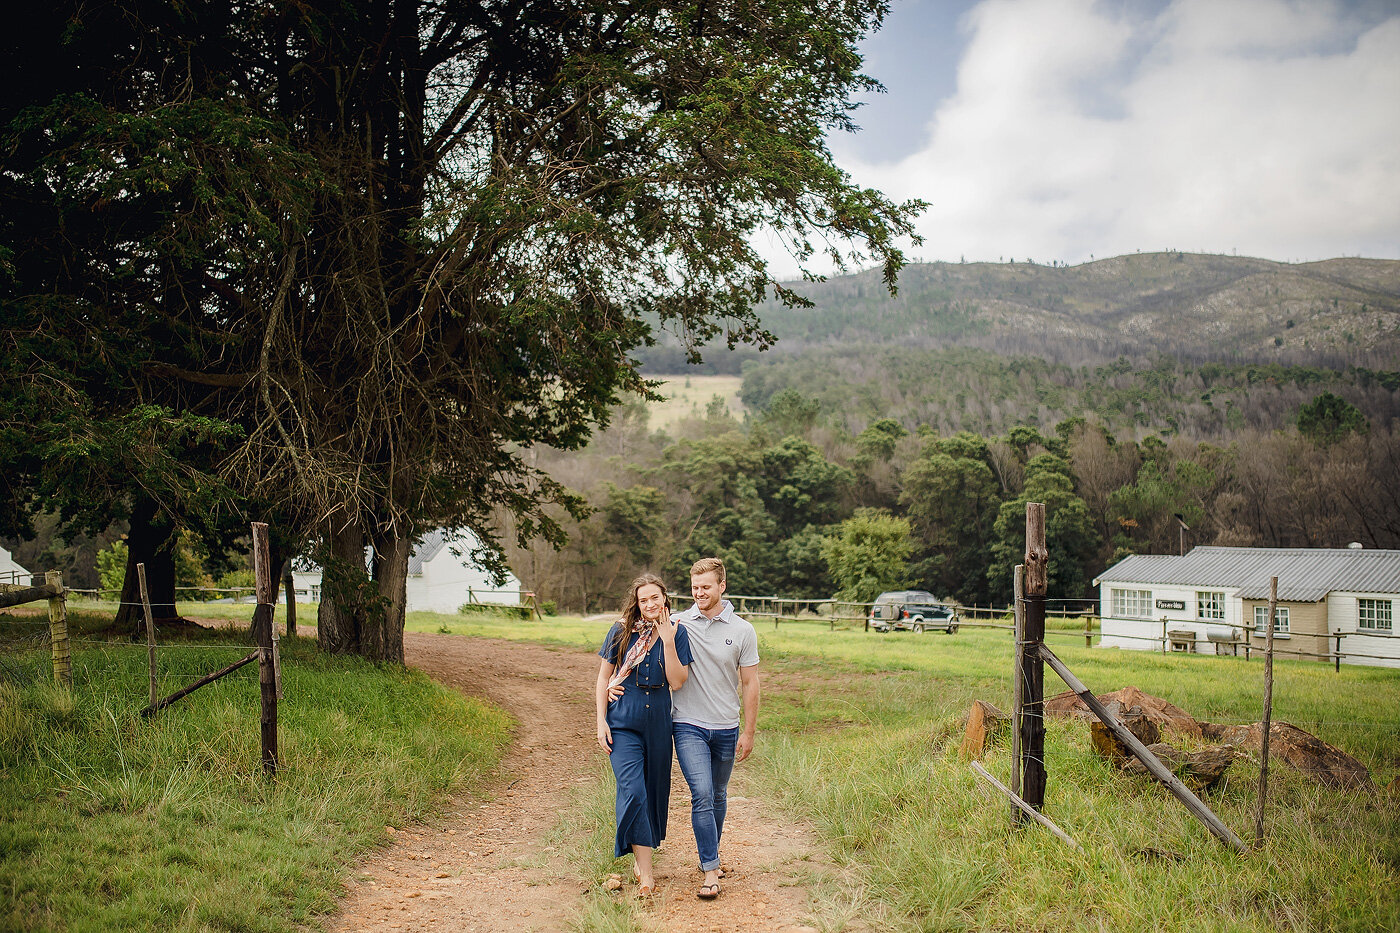 Real Life Engagement in a vineyard in the Garden Route.